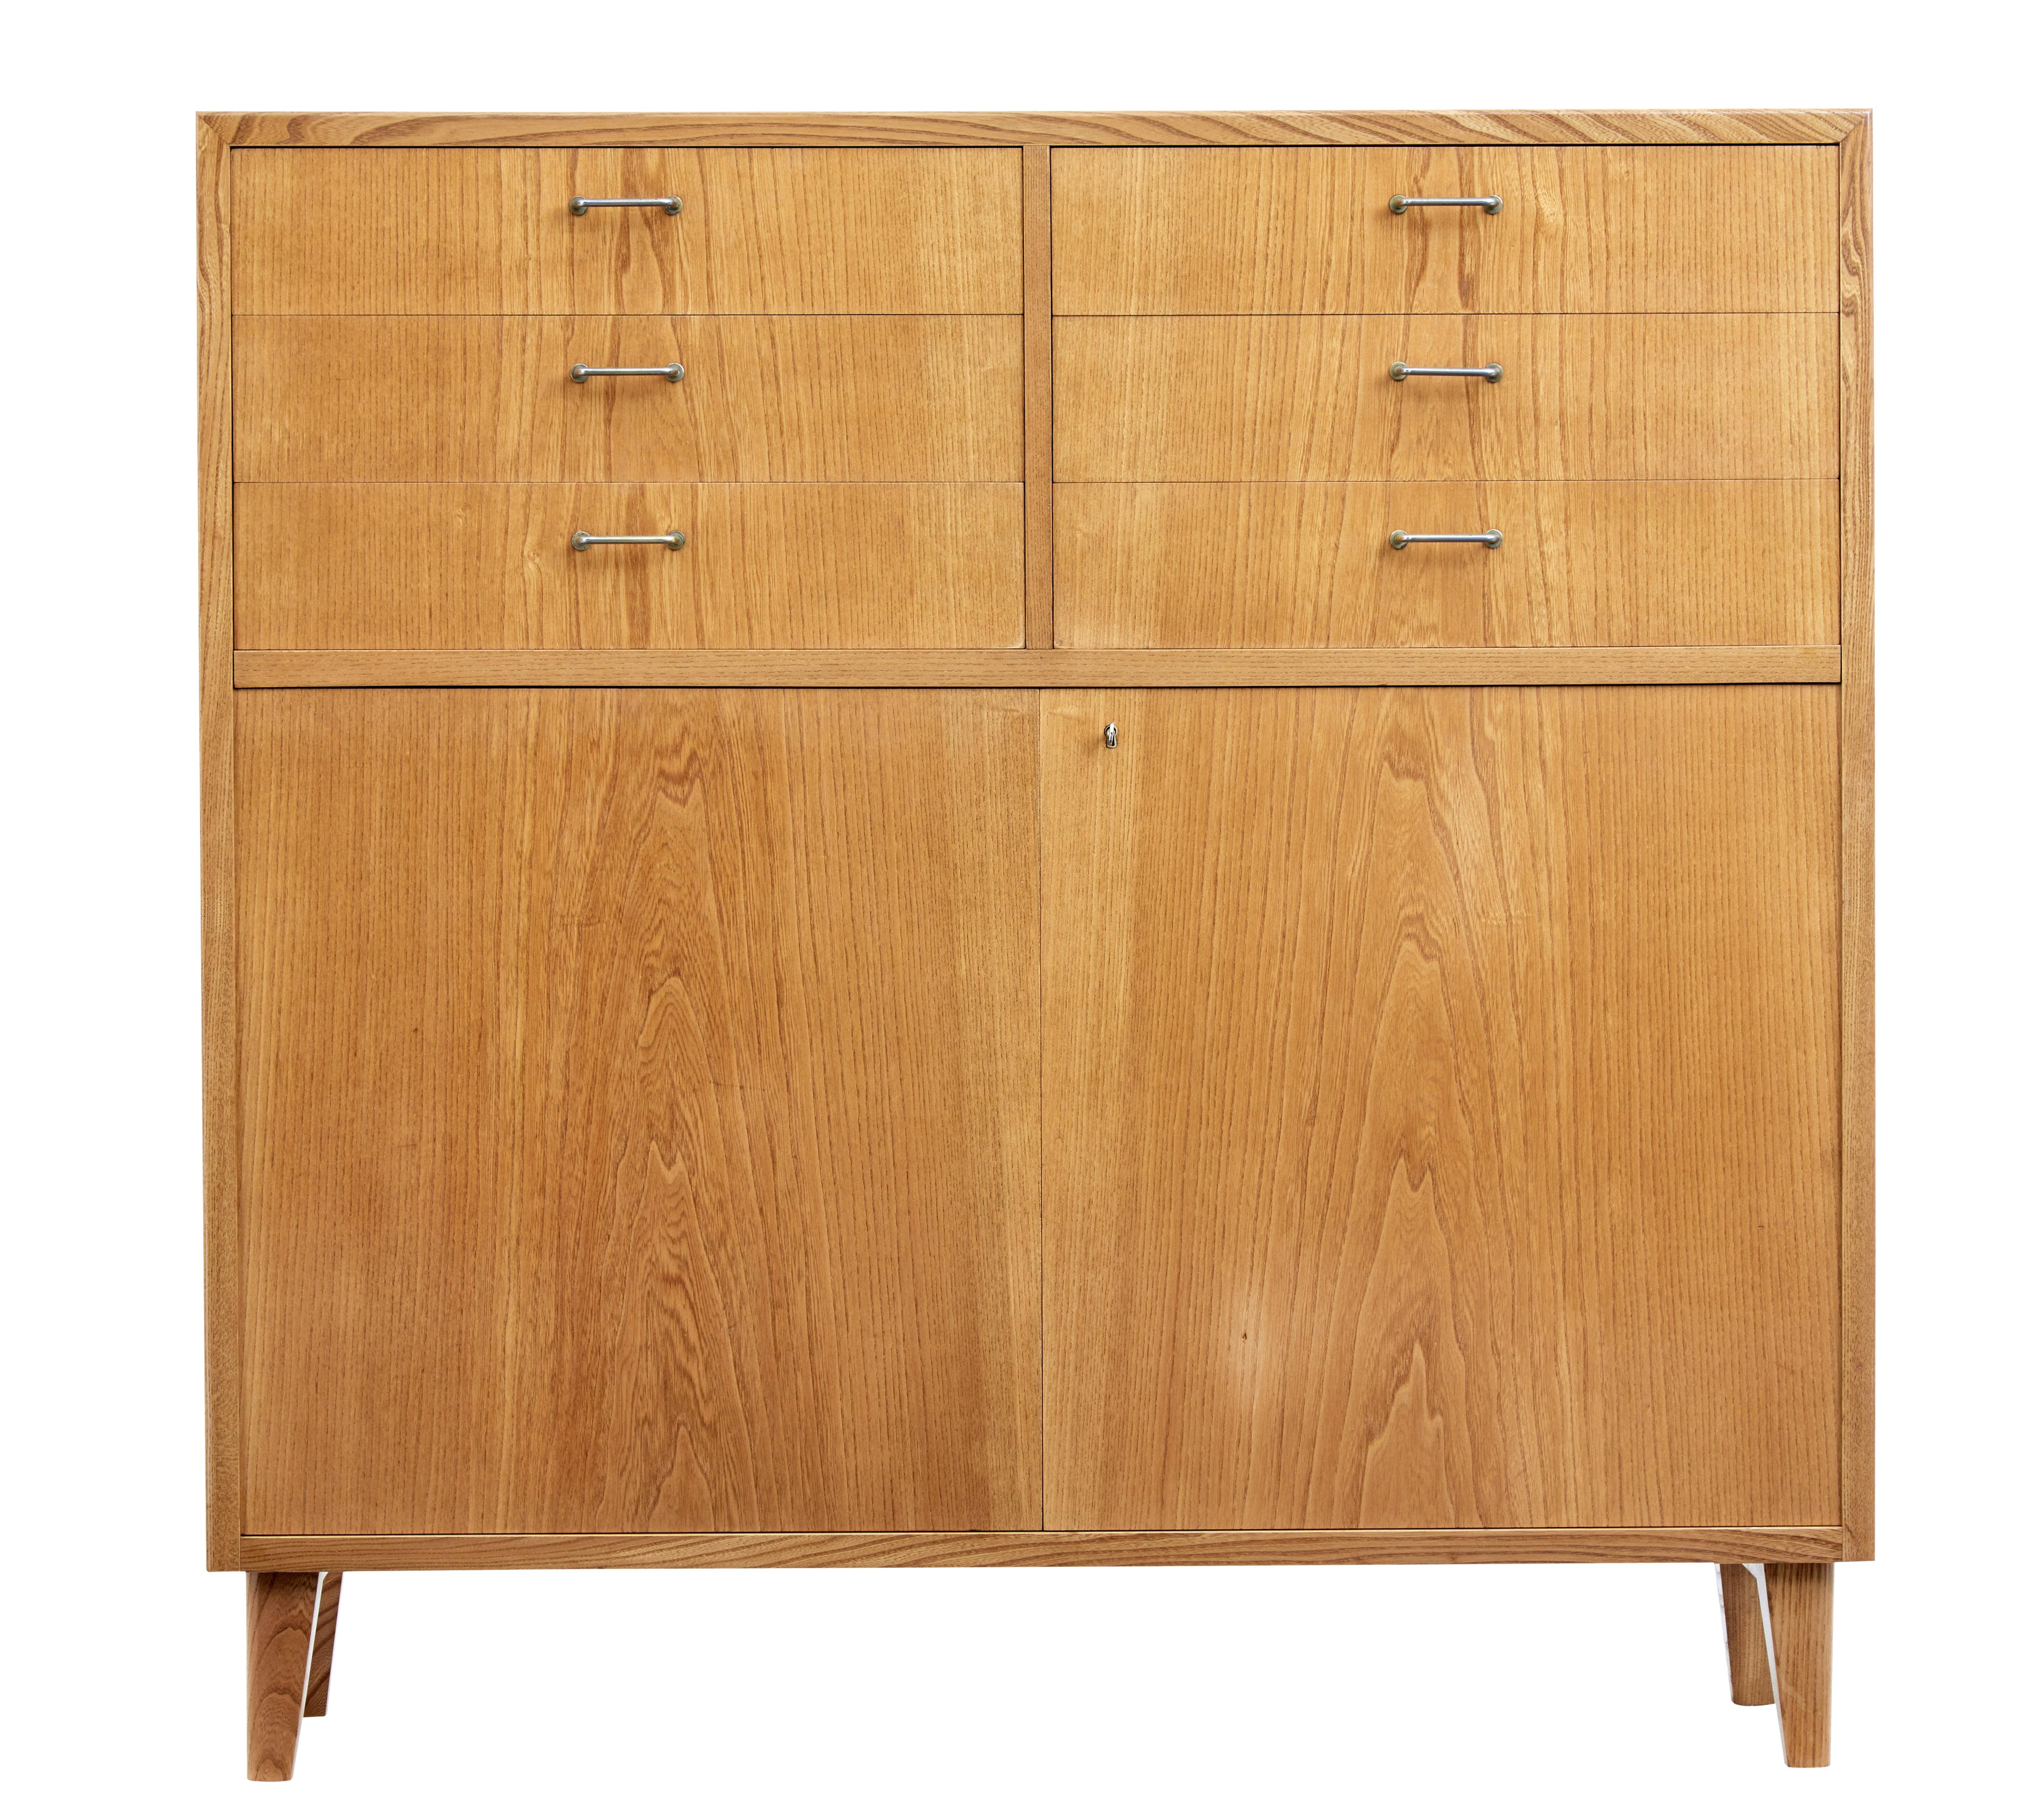 Small Scandinavian mid-20th century elm sideboard, circa 1950.

We are pleased to offer this delightful small cabinet which offers perfect storage for the modern home. Well-proportioned with the same height and width. Beautifully veneered in elm,